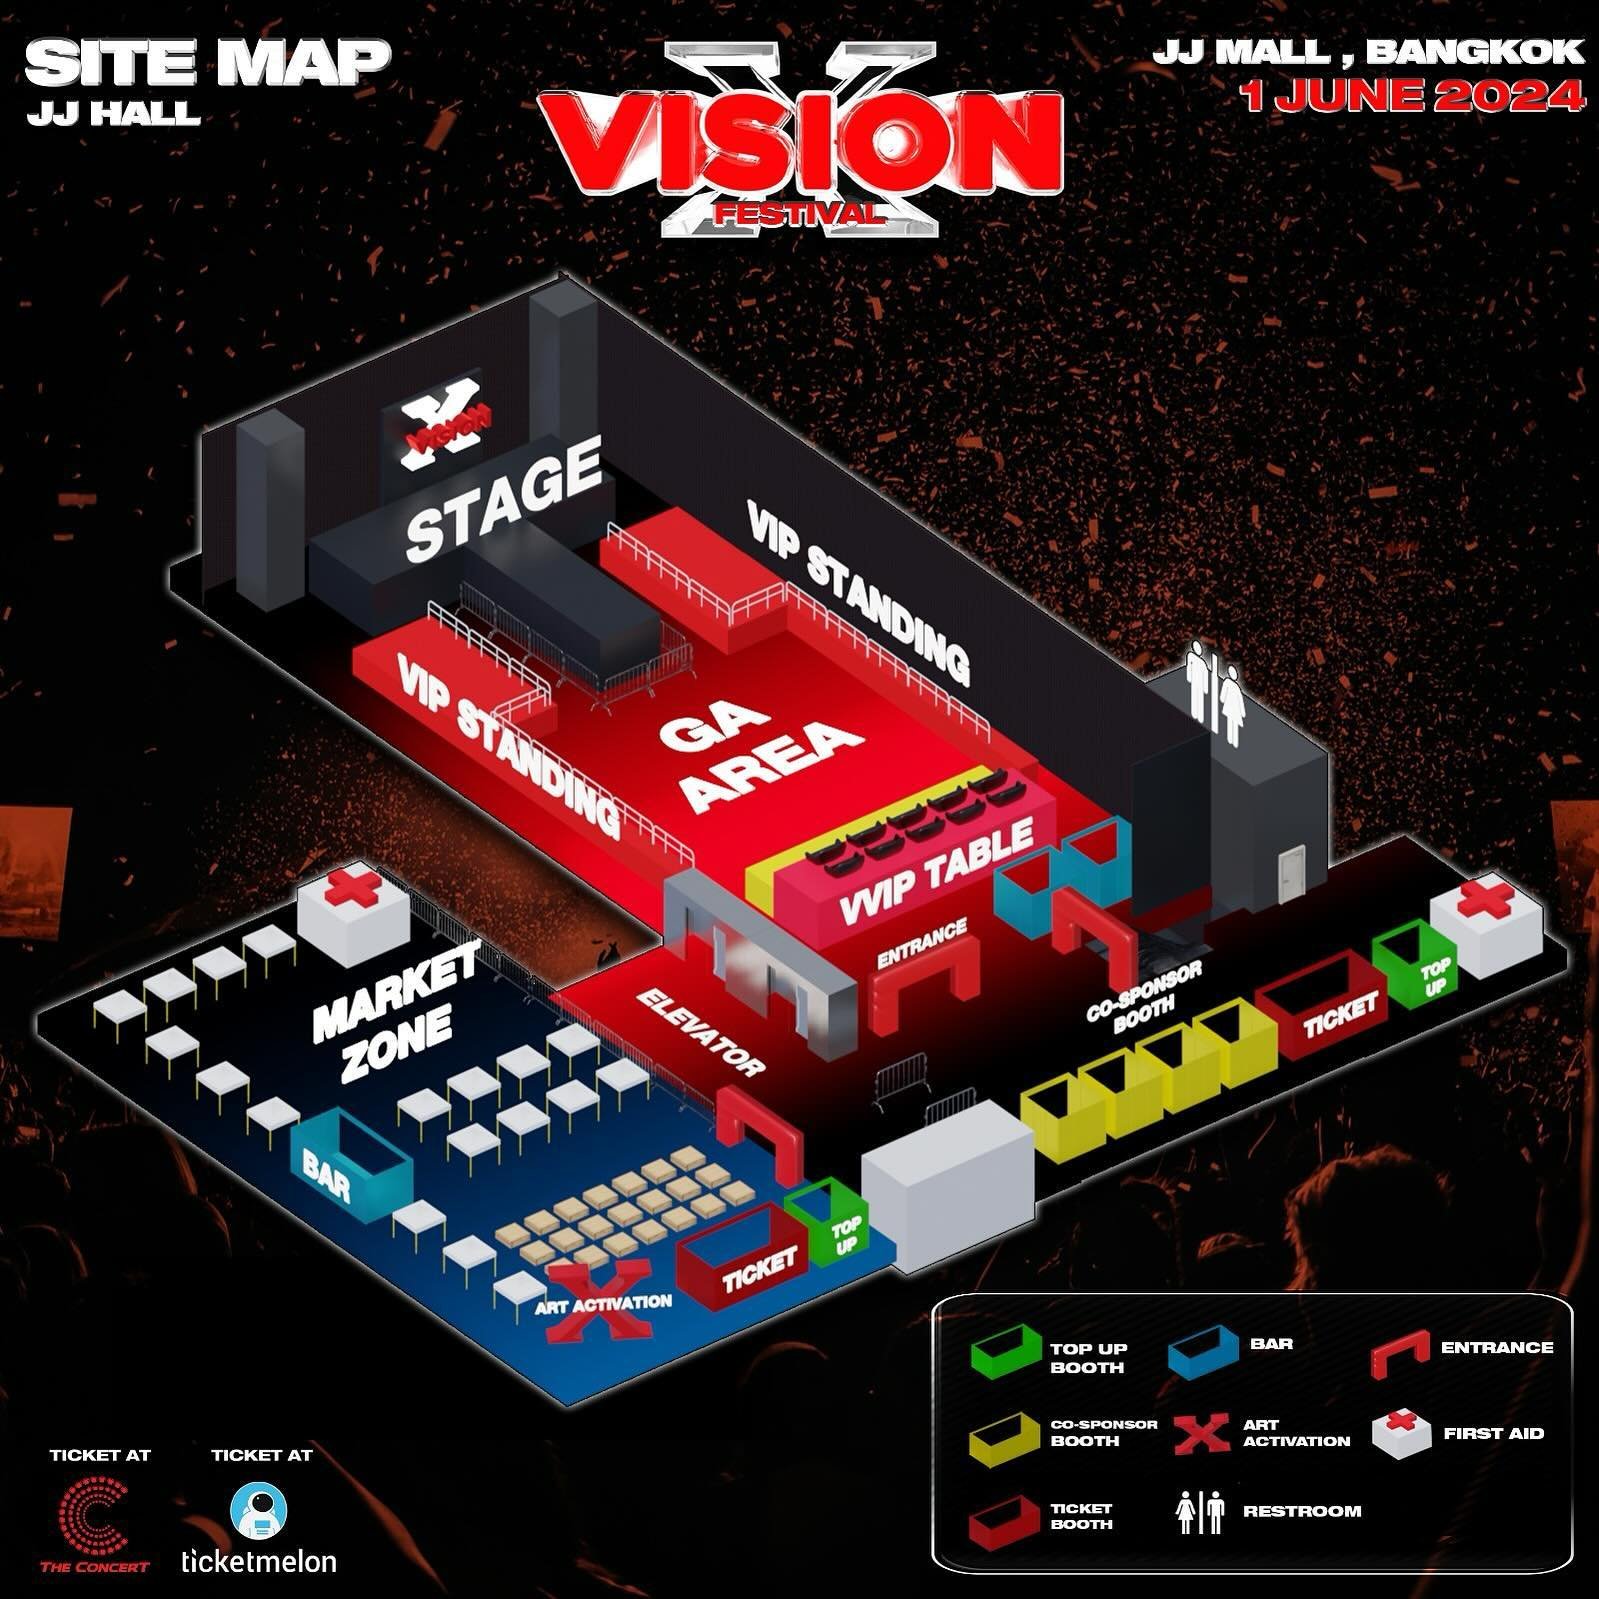 VISION X SITE MAP 🇹🇭🔥

Can&rsquo;t wait for the festival day 😮&zwj;💨

Get tickets now 👉🏼 visionxfestival.com

DATE - 1 JUNE 2024 📆

VENUE - JJ HALL, JJ MALL, BANGKOK 📍

#visionx #visionxfestival